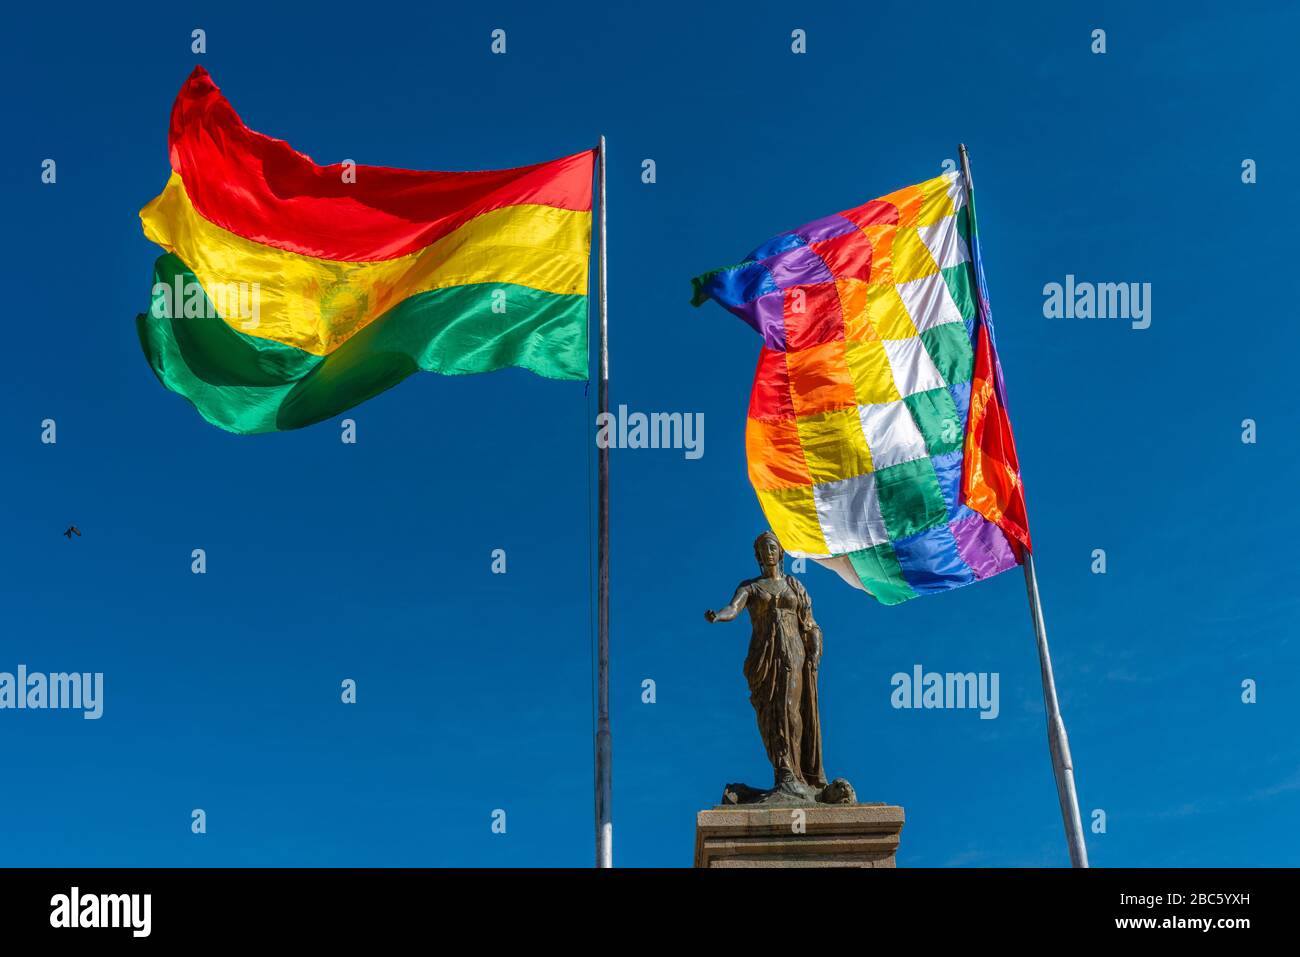 Bolivian flag and flag of the indigenous people,Copacabana, Lake Titicaca, Andes Mountains, Department La Paz, Bolivia, Latin America Stock Photo